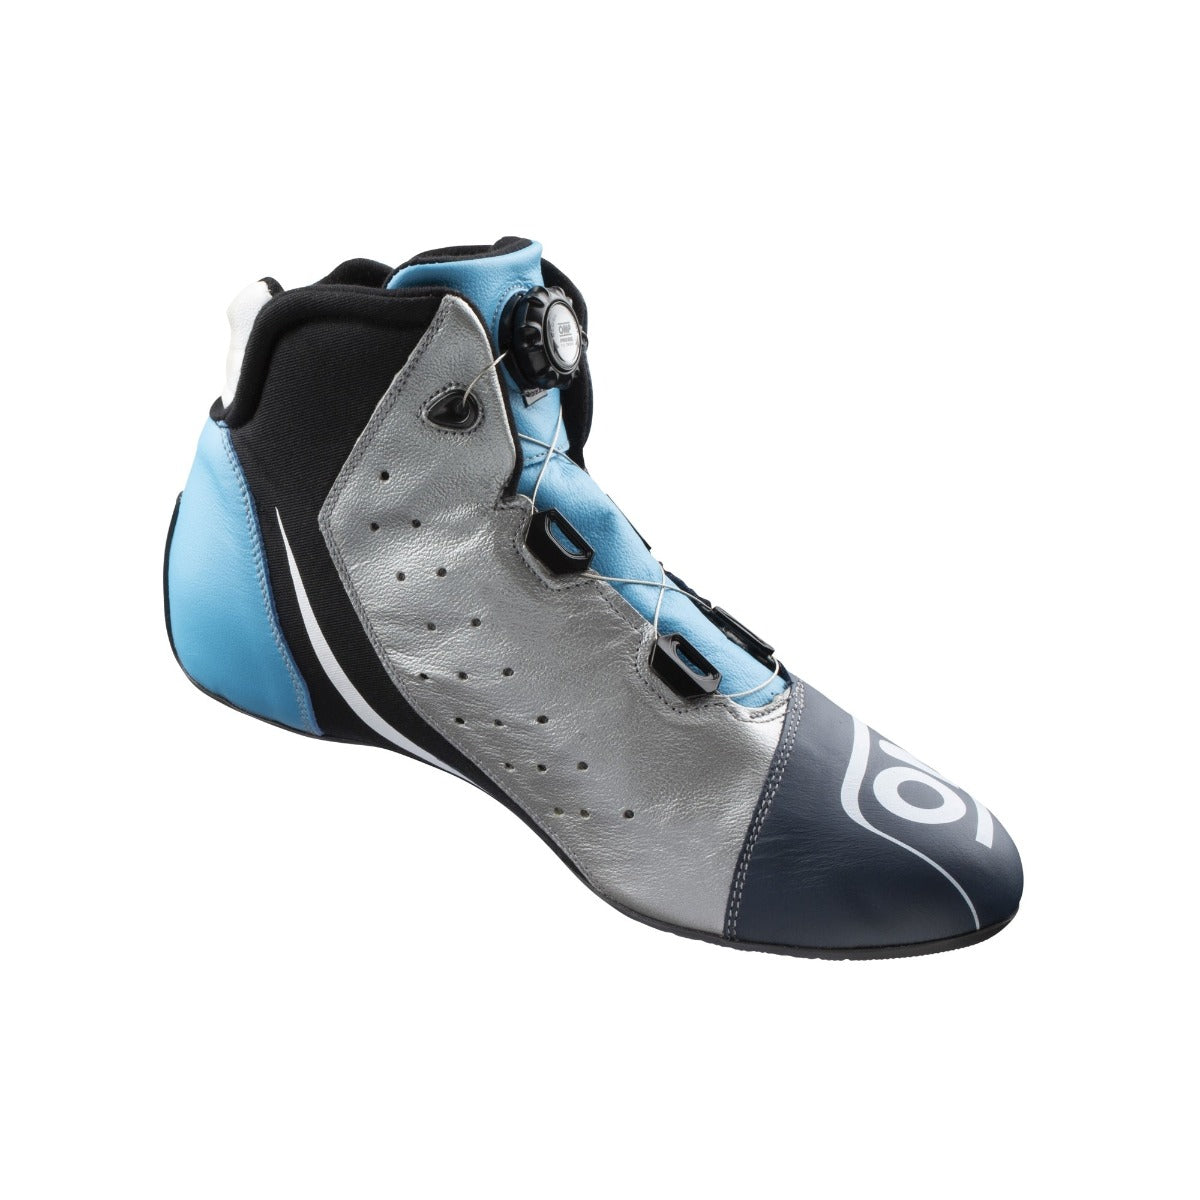 Image of OMP One Evo X R Nomex Race Shoe in black and cyan blue